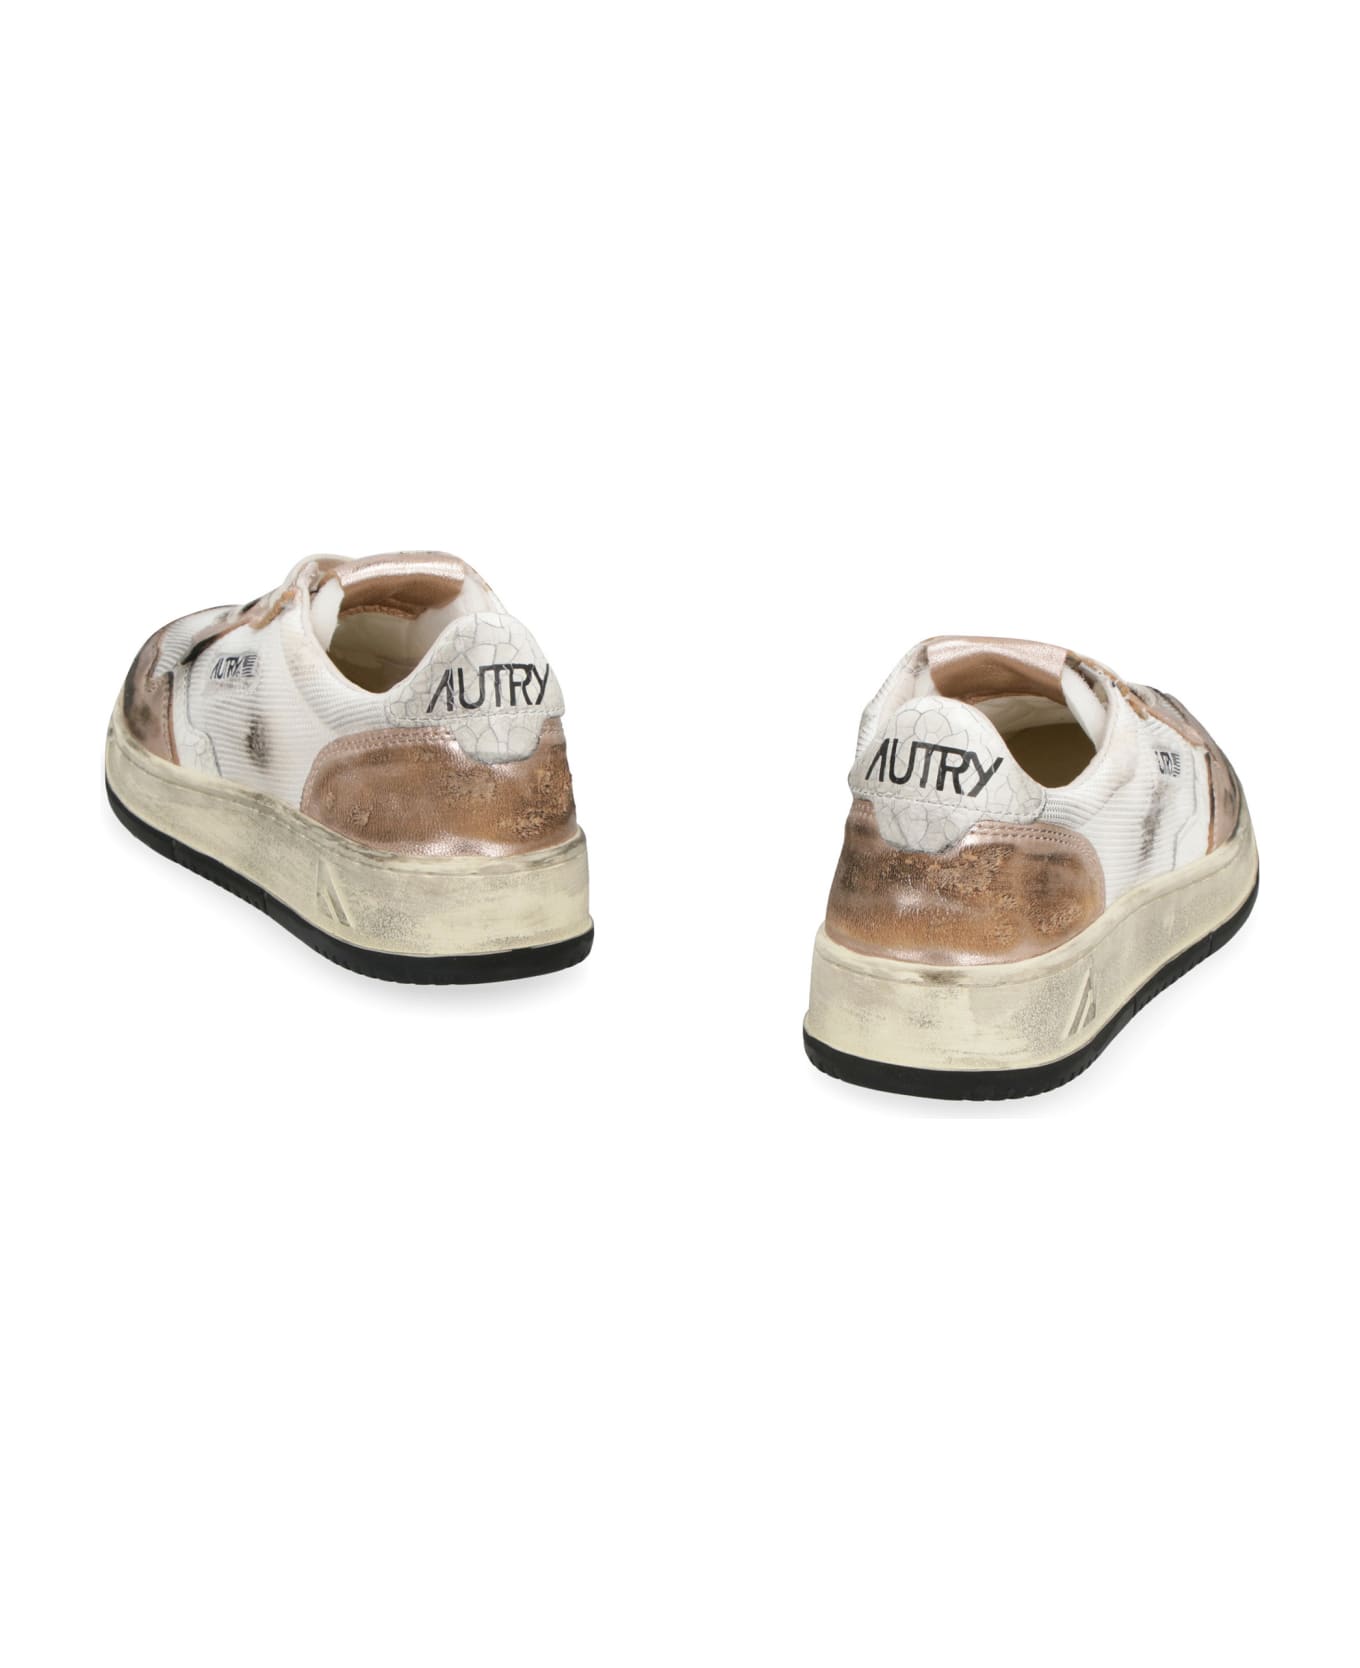 Autry Super Vintage Medalist Low Sneakers In White And Gold Leather - Bronze